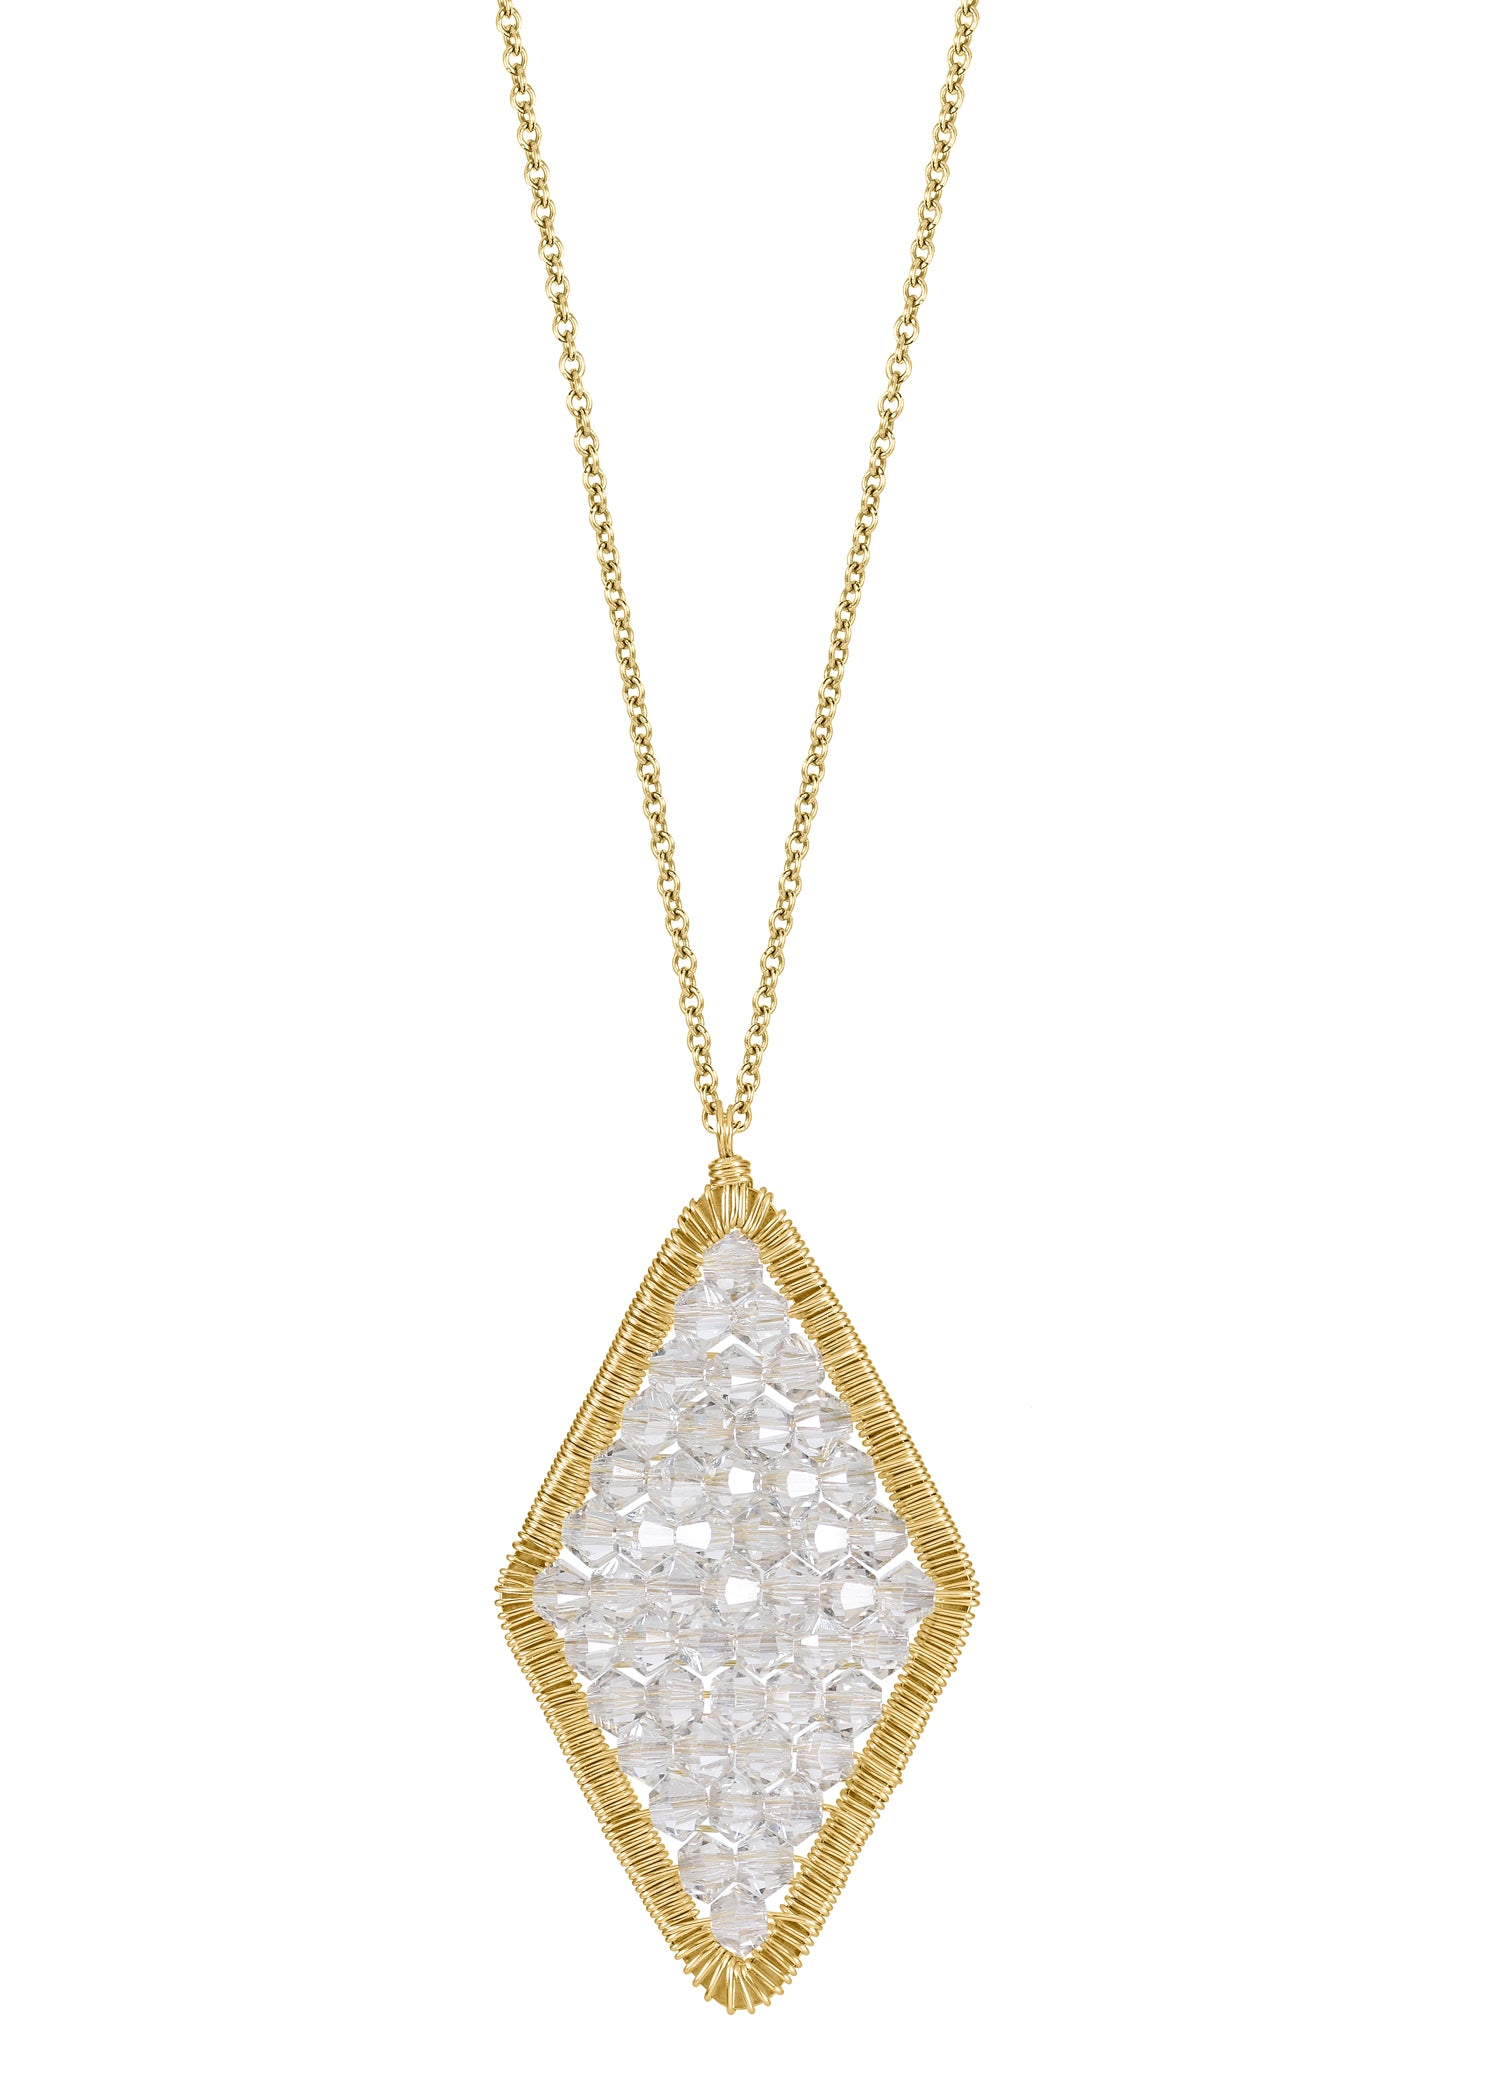 Crystal 14k gold fill Necklace measures 17" in length Pendant measures 1-3/8" in length and 3/4" in width at the widest point Handmade in our Los Angeles studio